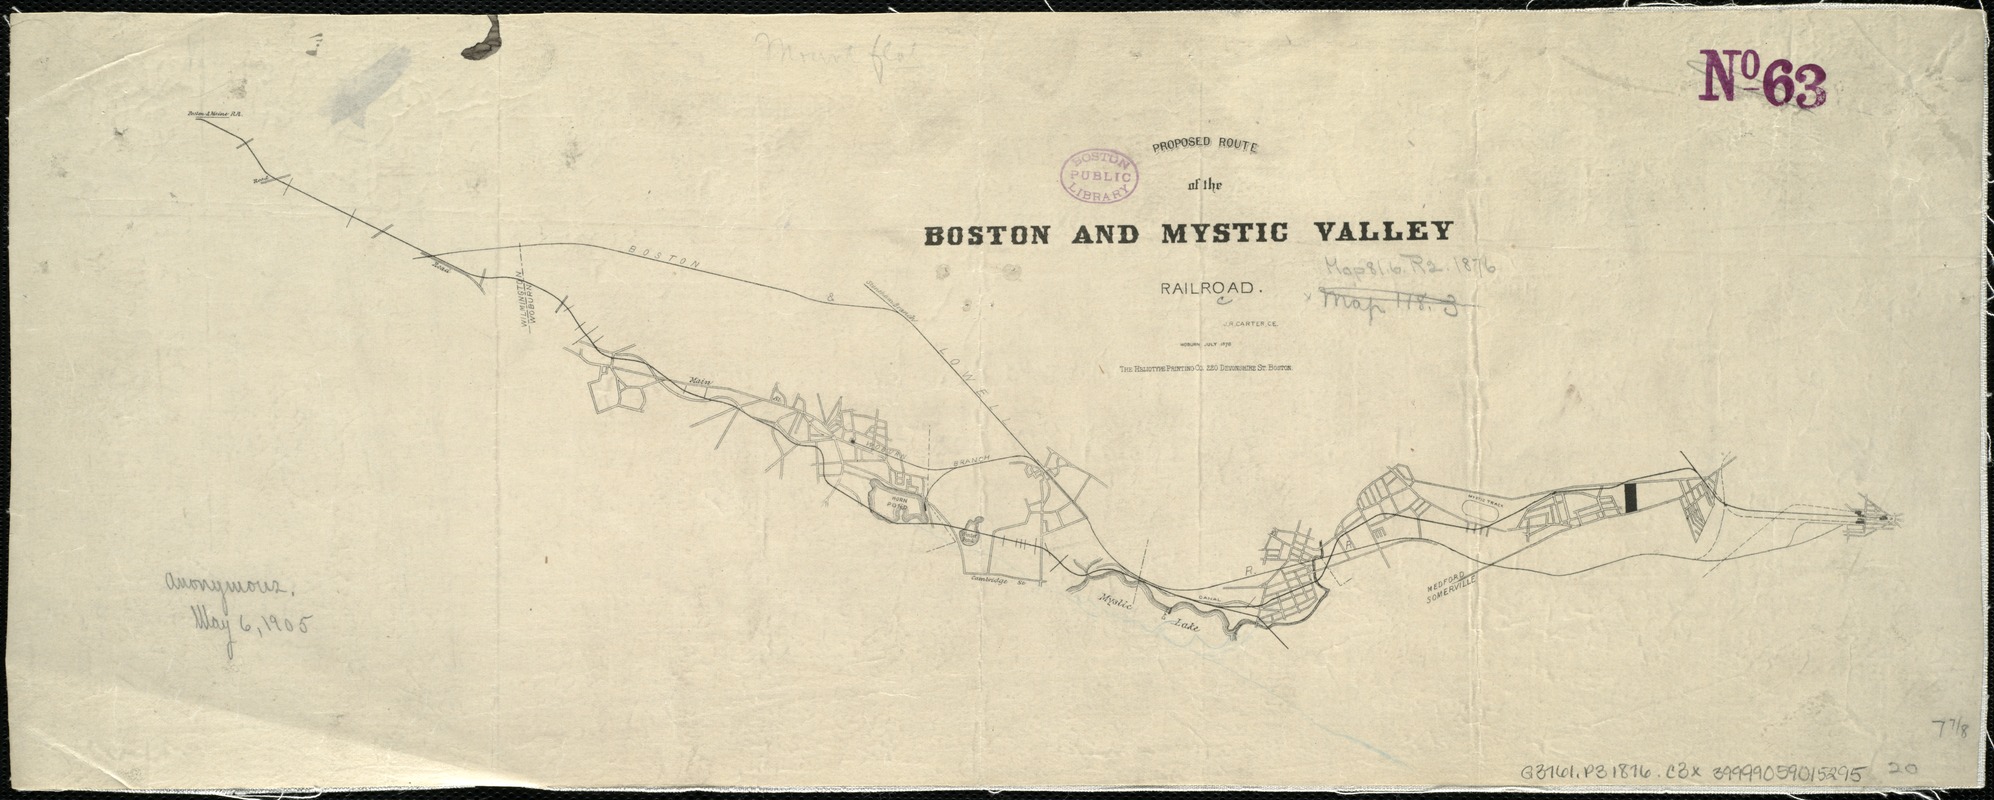 Proposed route of the Boston and Mystic Valley railroad